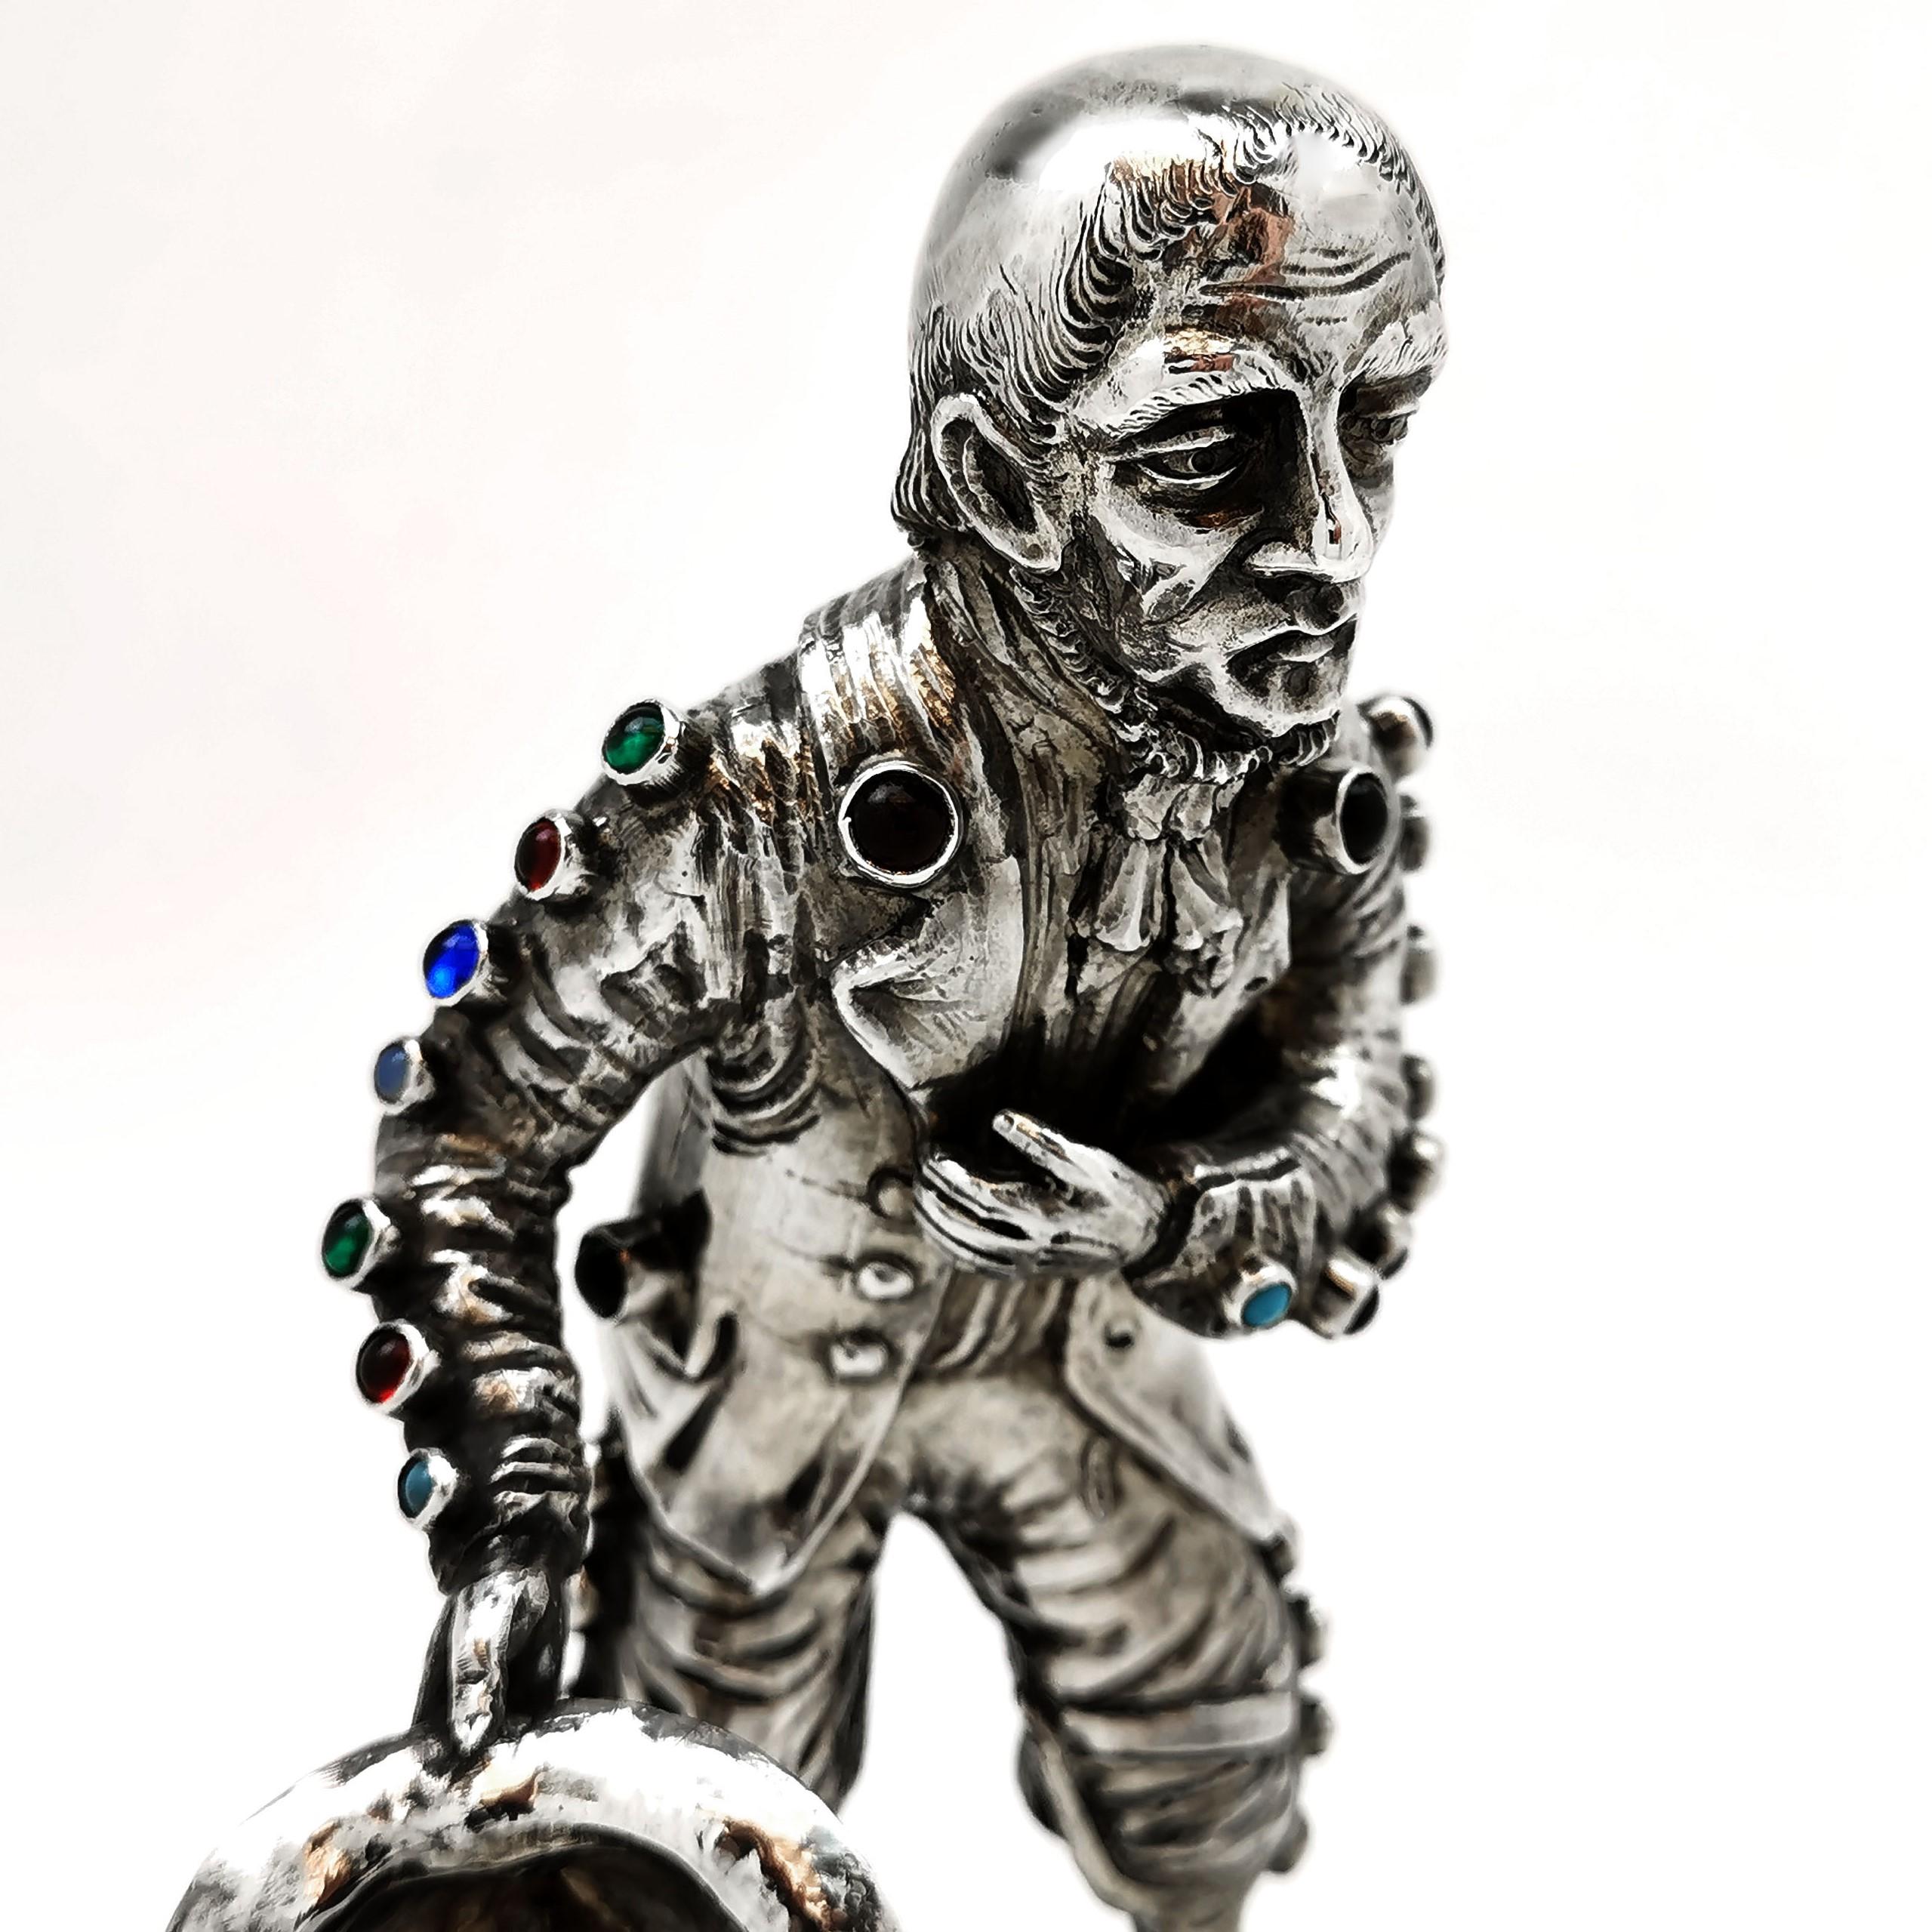 A lovely antique German solid silver model figure of a man inset with coloured cabochon stones. The man appears to be begging, holding out his hat with a poignant expression on his face. He has a wooden peg leg and stands on a stone set